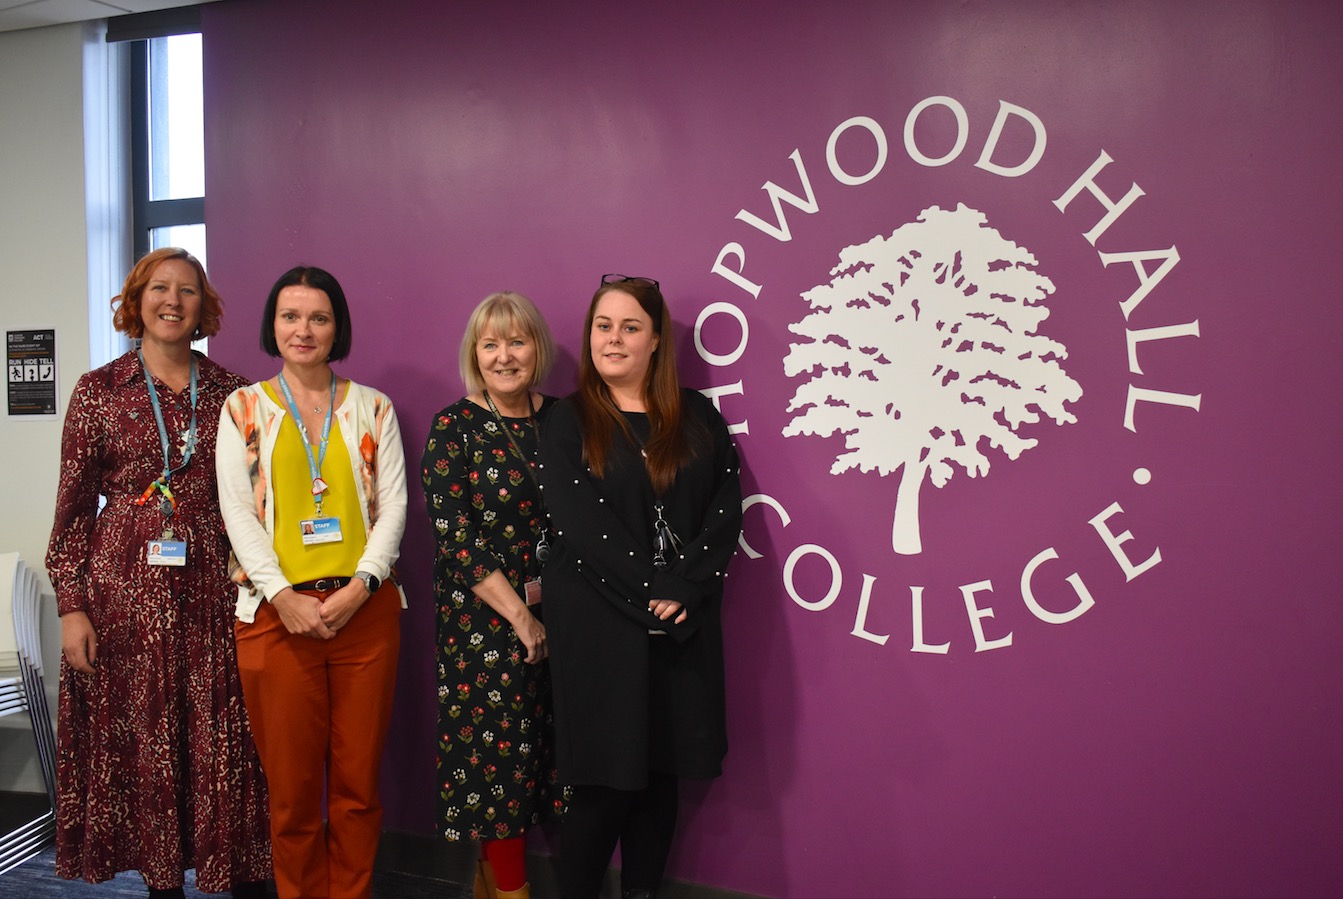 Hopwood Hall College And University Centre recognised with highly prestigious Queen’s Anniversary Prize